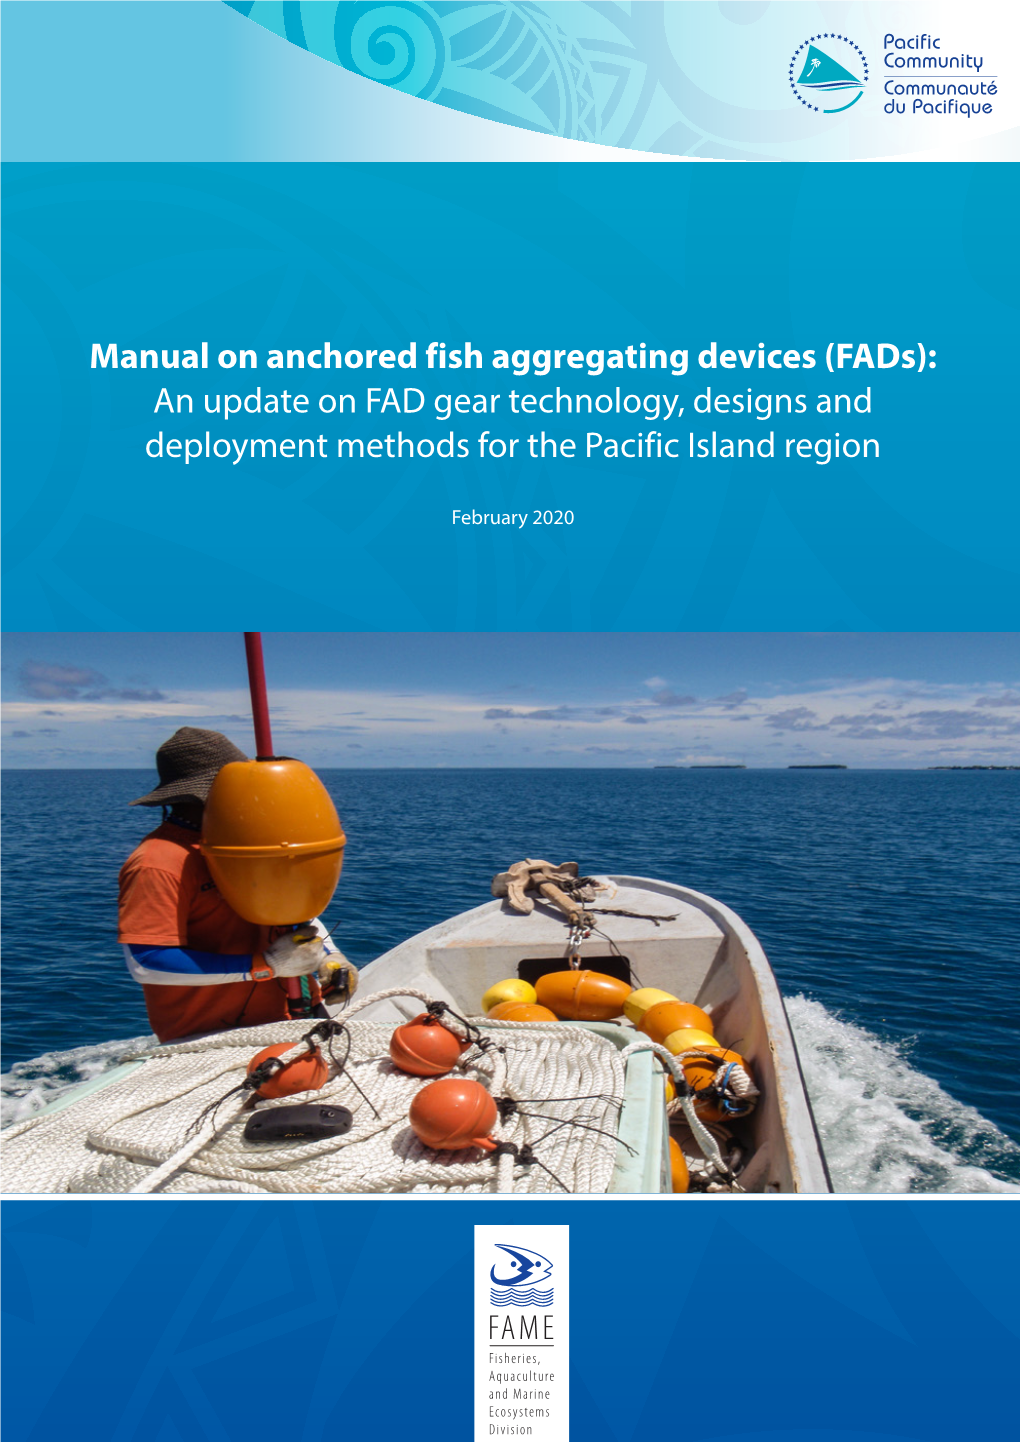 Manual on Anchored Fish Aggregating Devices (Fads): an Update on FAD Gear Technology, Designs and Deployment Methods for the Pacific Island Region